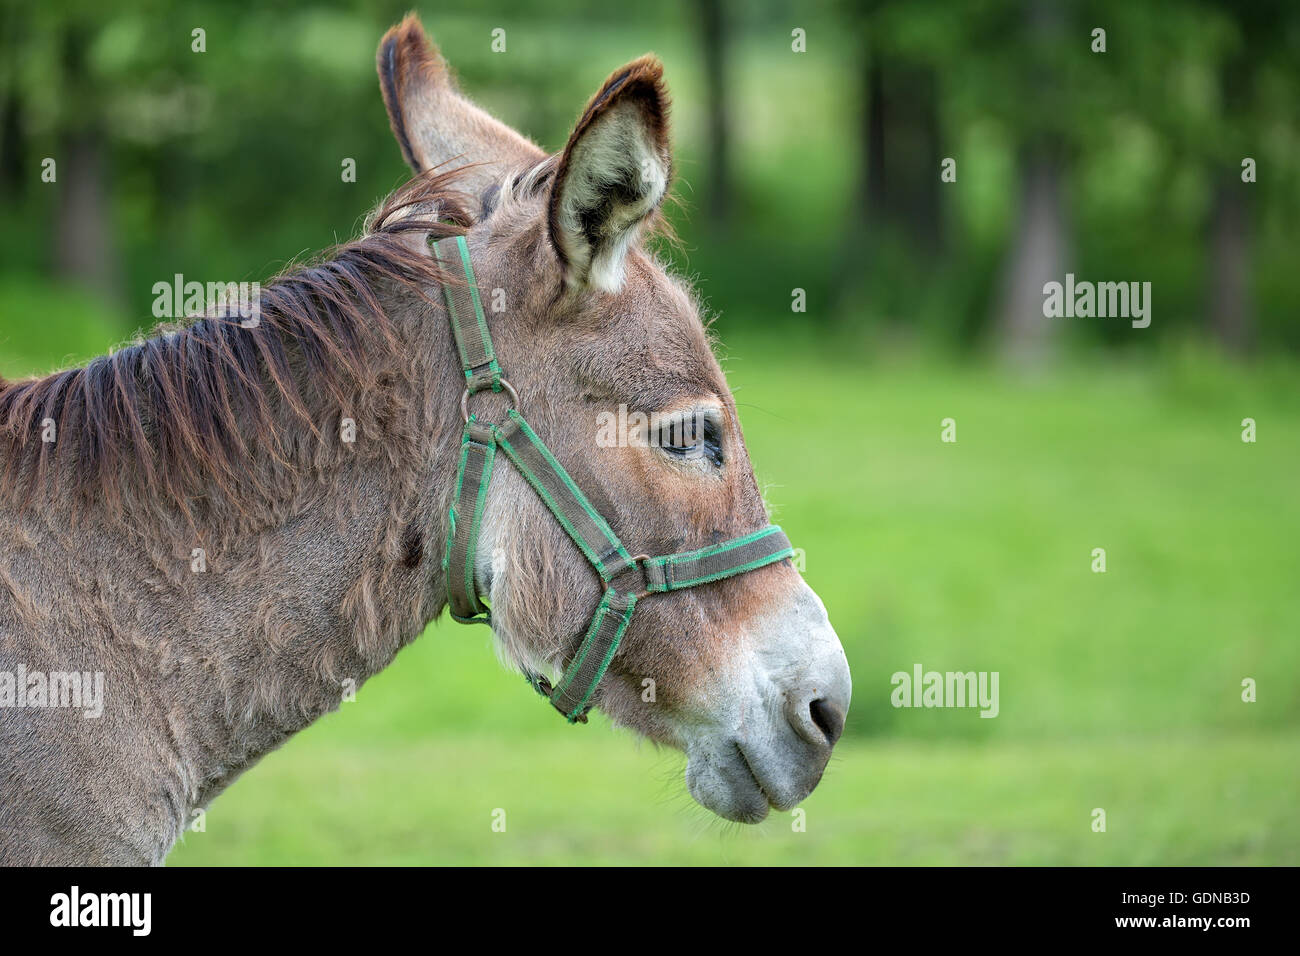 Donkey in a clearing, a portrait Stock Photo